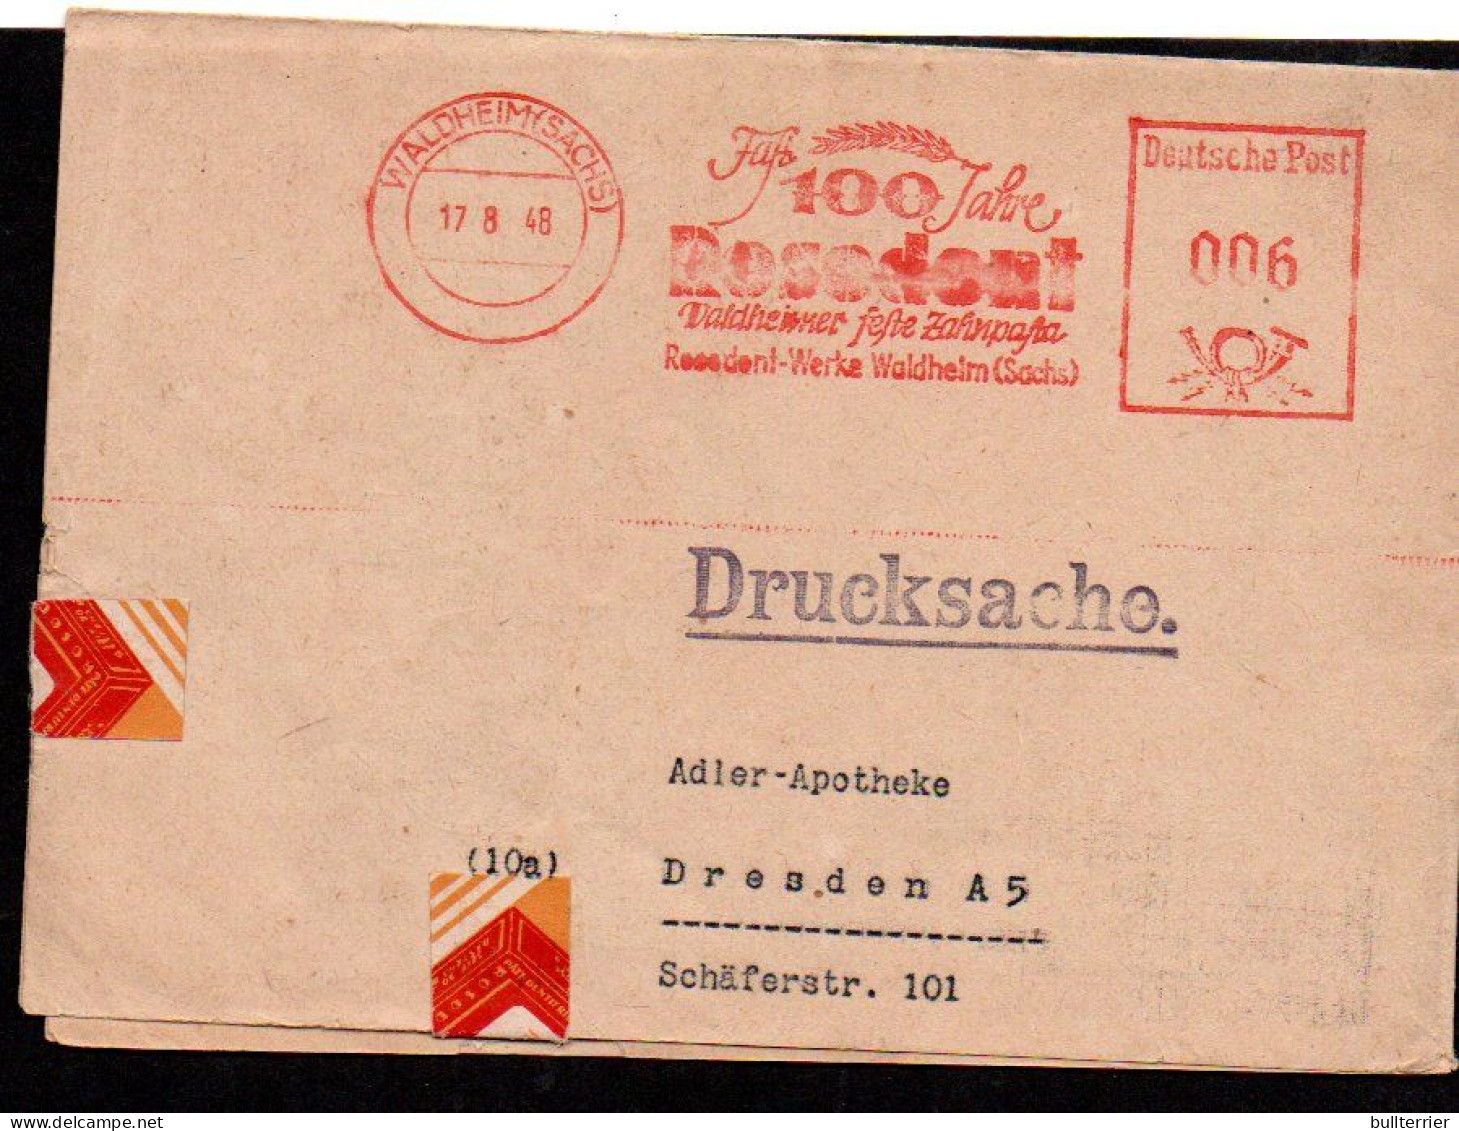 DENISTRY -  GERMANY - 1948 - COVER WALDHEIM TO DRESDEN WITH SLOGAN CANCELLATION - Medizin